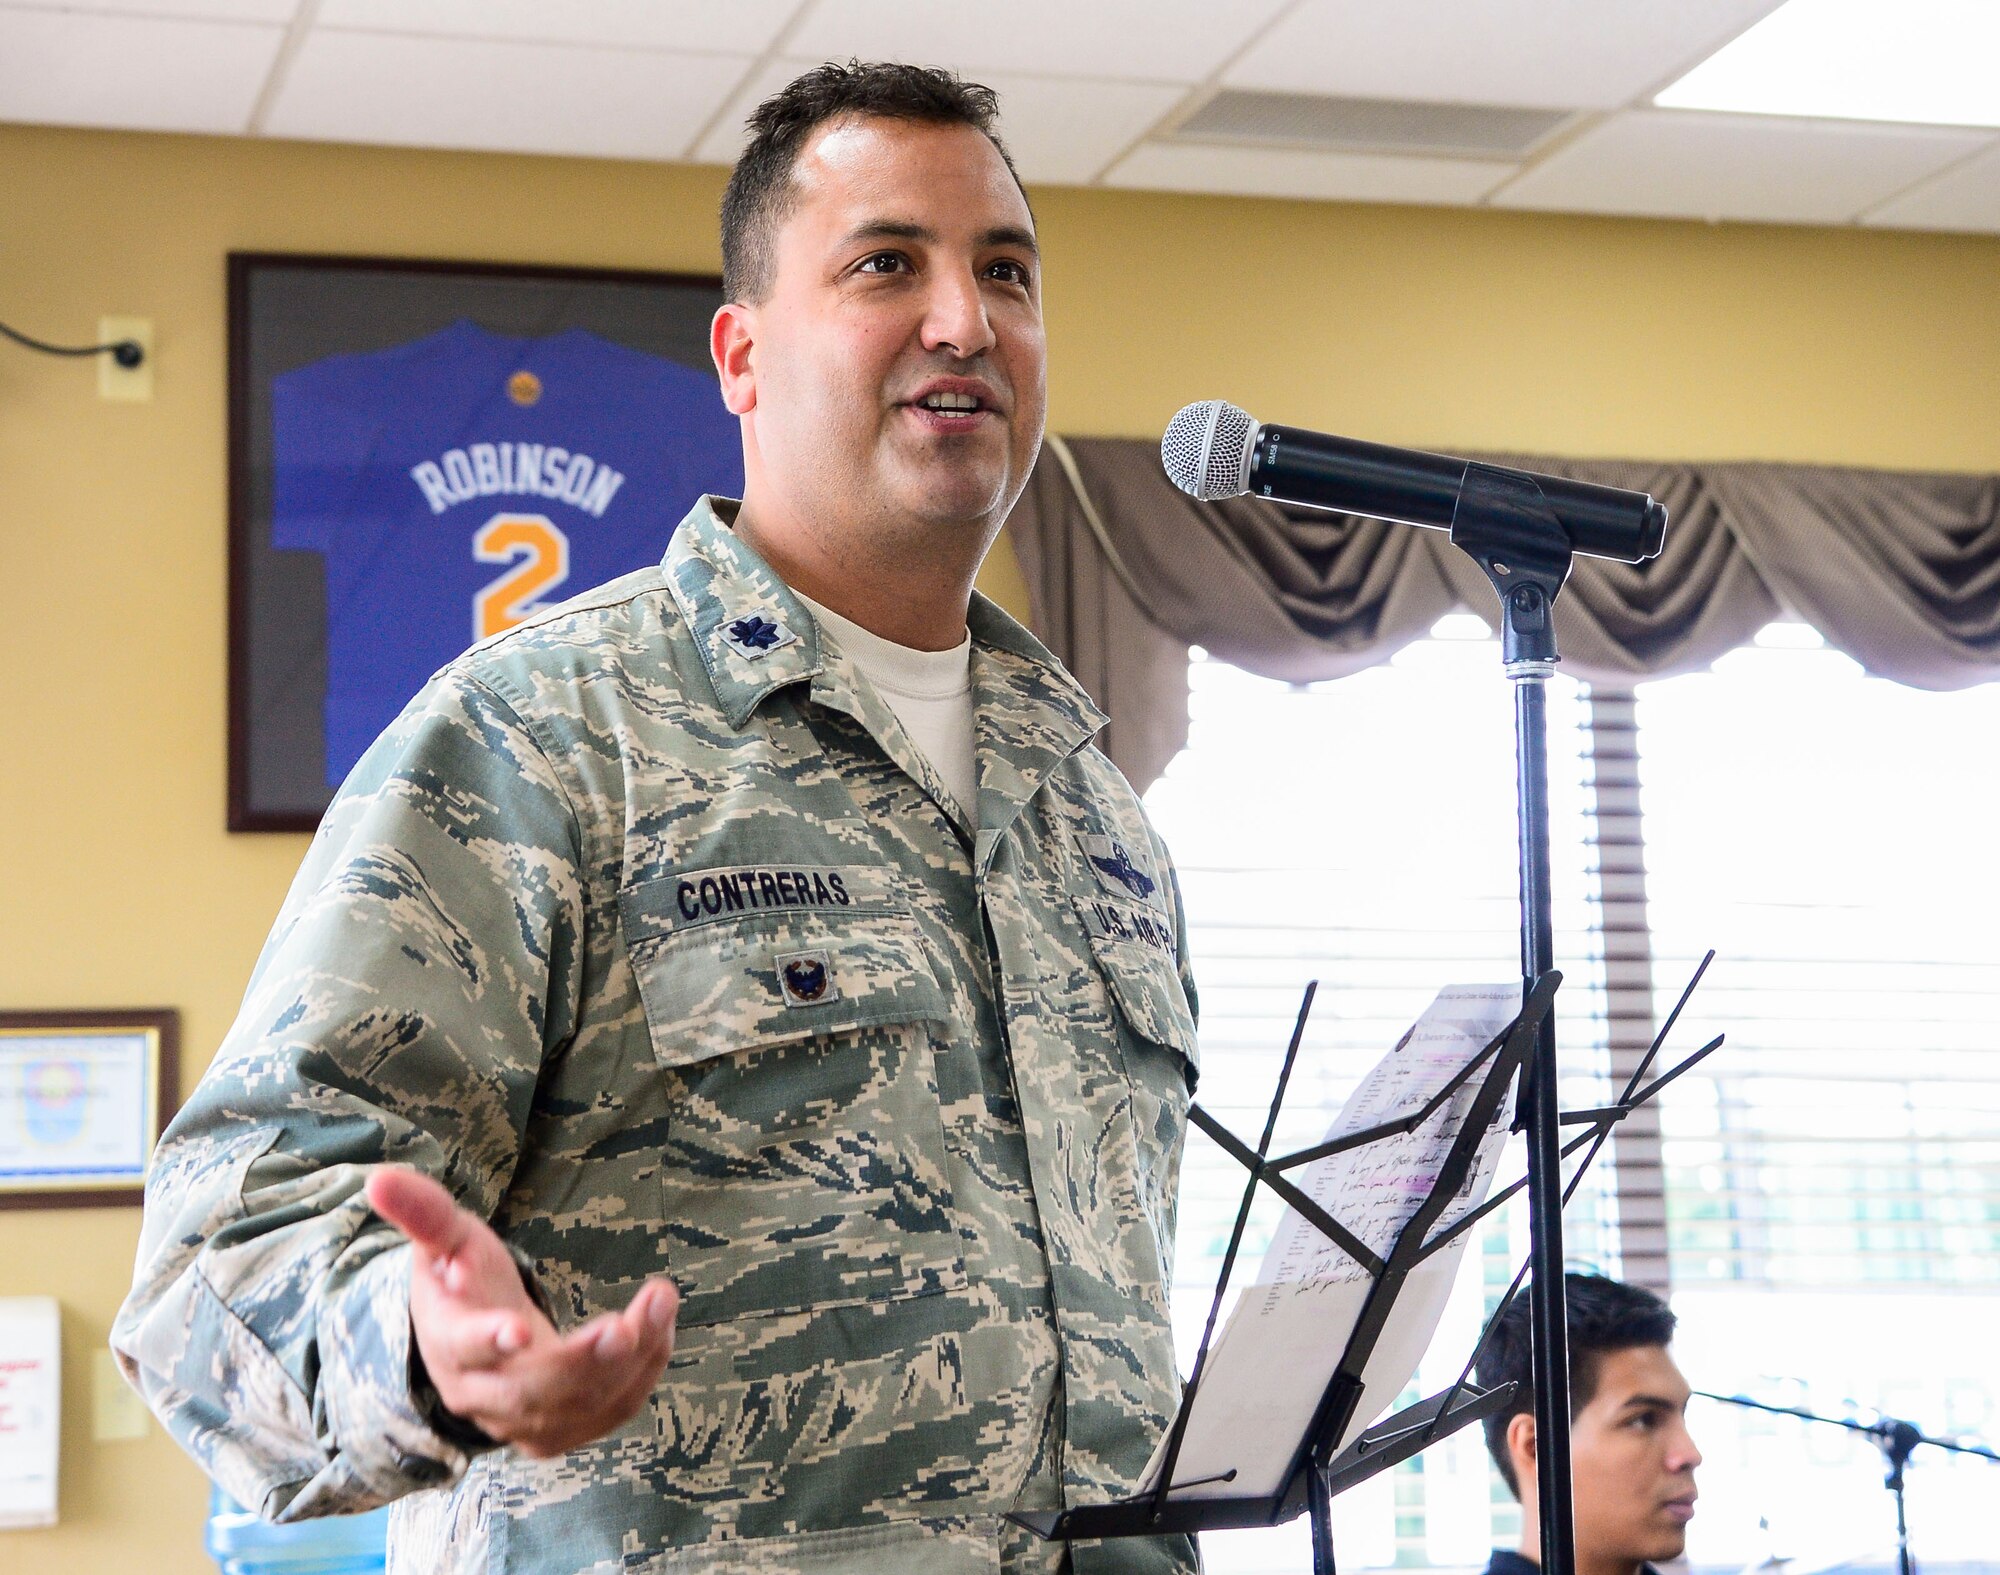 U.S. Air Force Lt. Col. Matthew Contreras, deputy commander of Joint Task Force-Bravo gives the key note speech celebrating Hispanic Heritage Month at the dining facility on Soto Cano Air Base, Honduras, Oct. 9, 2014.  In celebration of Hispanic Heritage Month, JTF-B coordinated performances from the Honduran Navy Band stationed in Tegucigalpa,  the official folk dance group from the Escuela Normal Centro América, as well as a couple of performers  from the Dilcia Mejia Dance School. (U.S. Air Force Photo by Tech. Sgt. Heather Redman/Released)